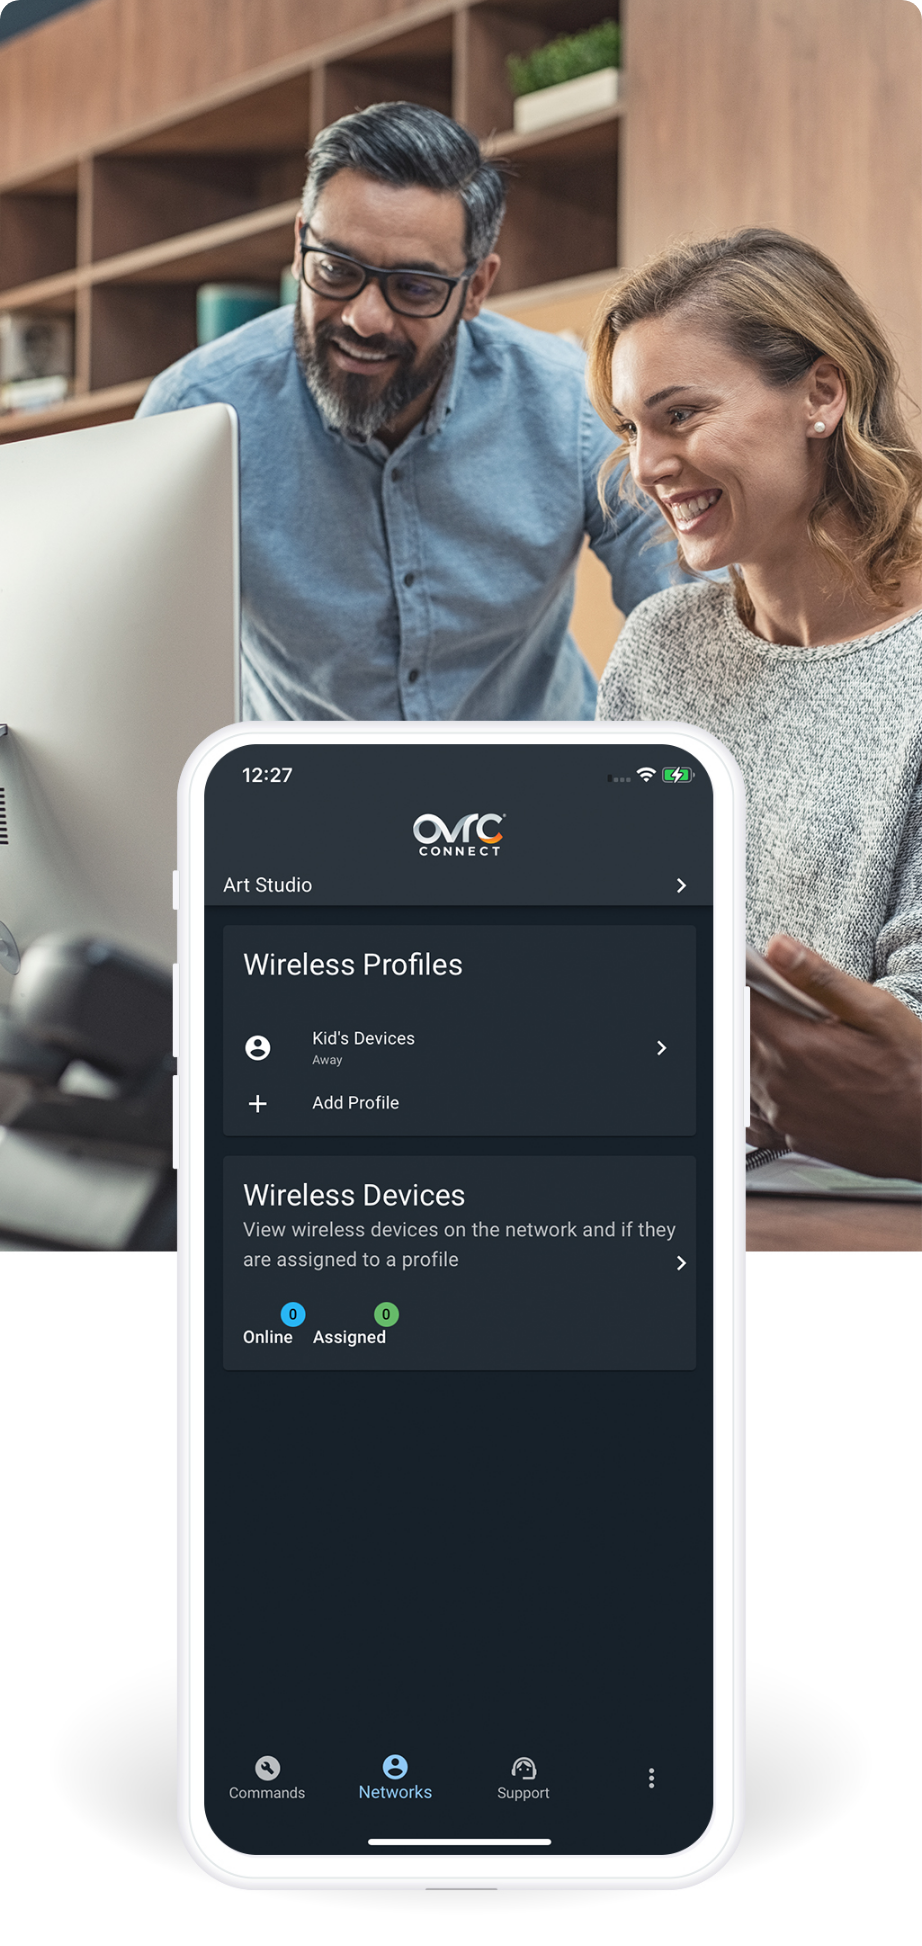 OvrC Connect dashboard on tablet